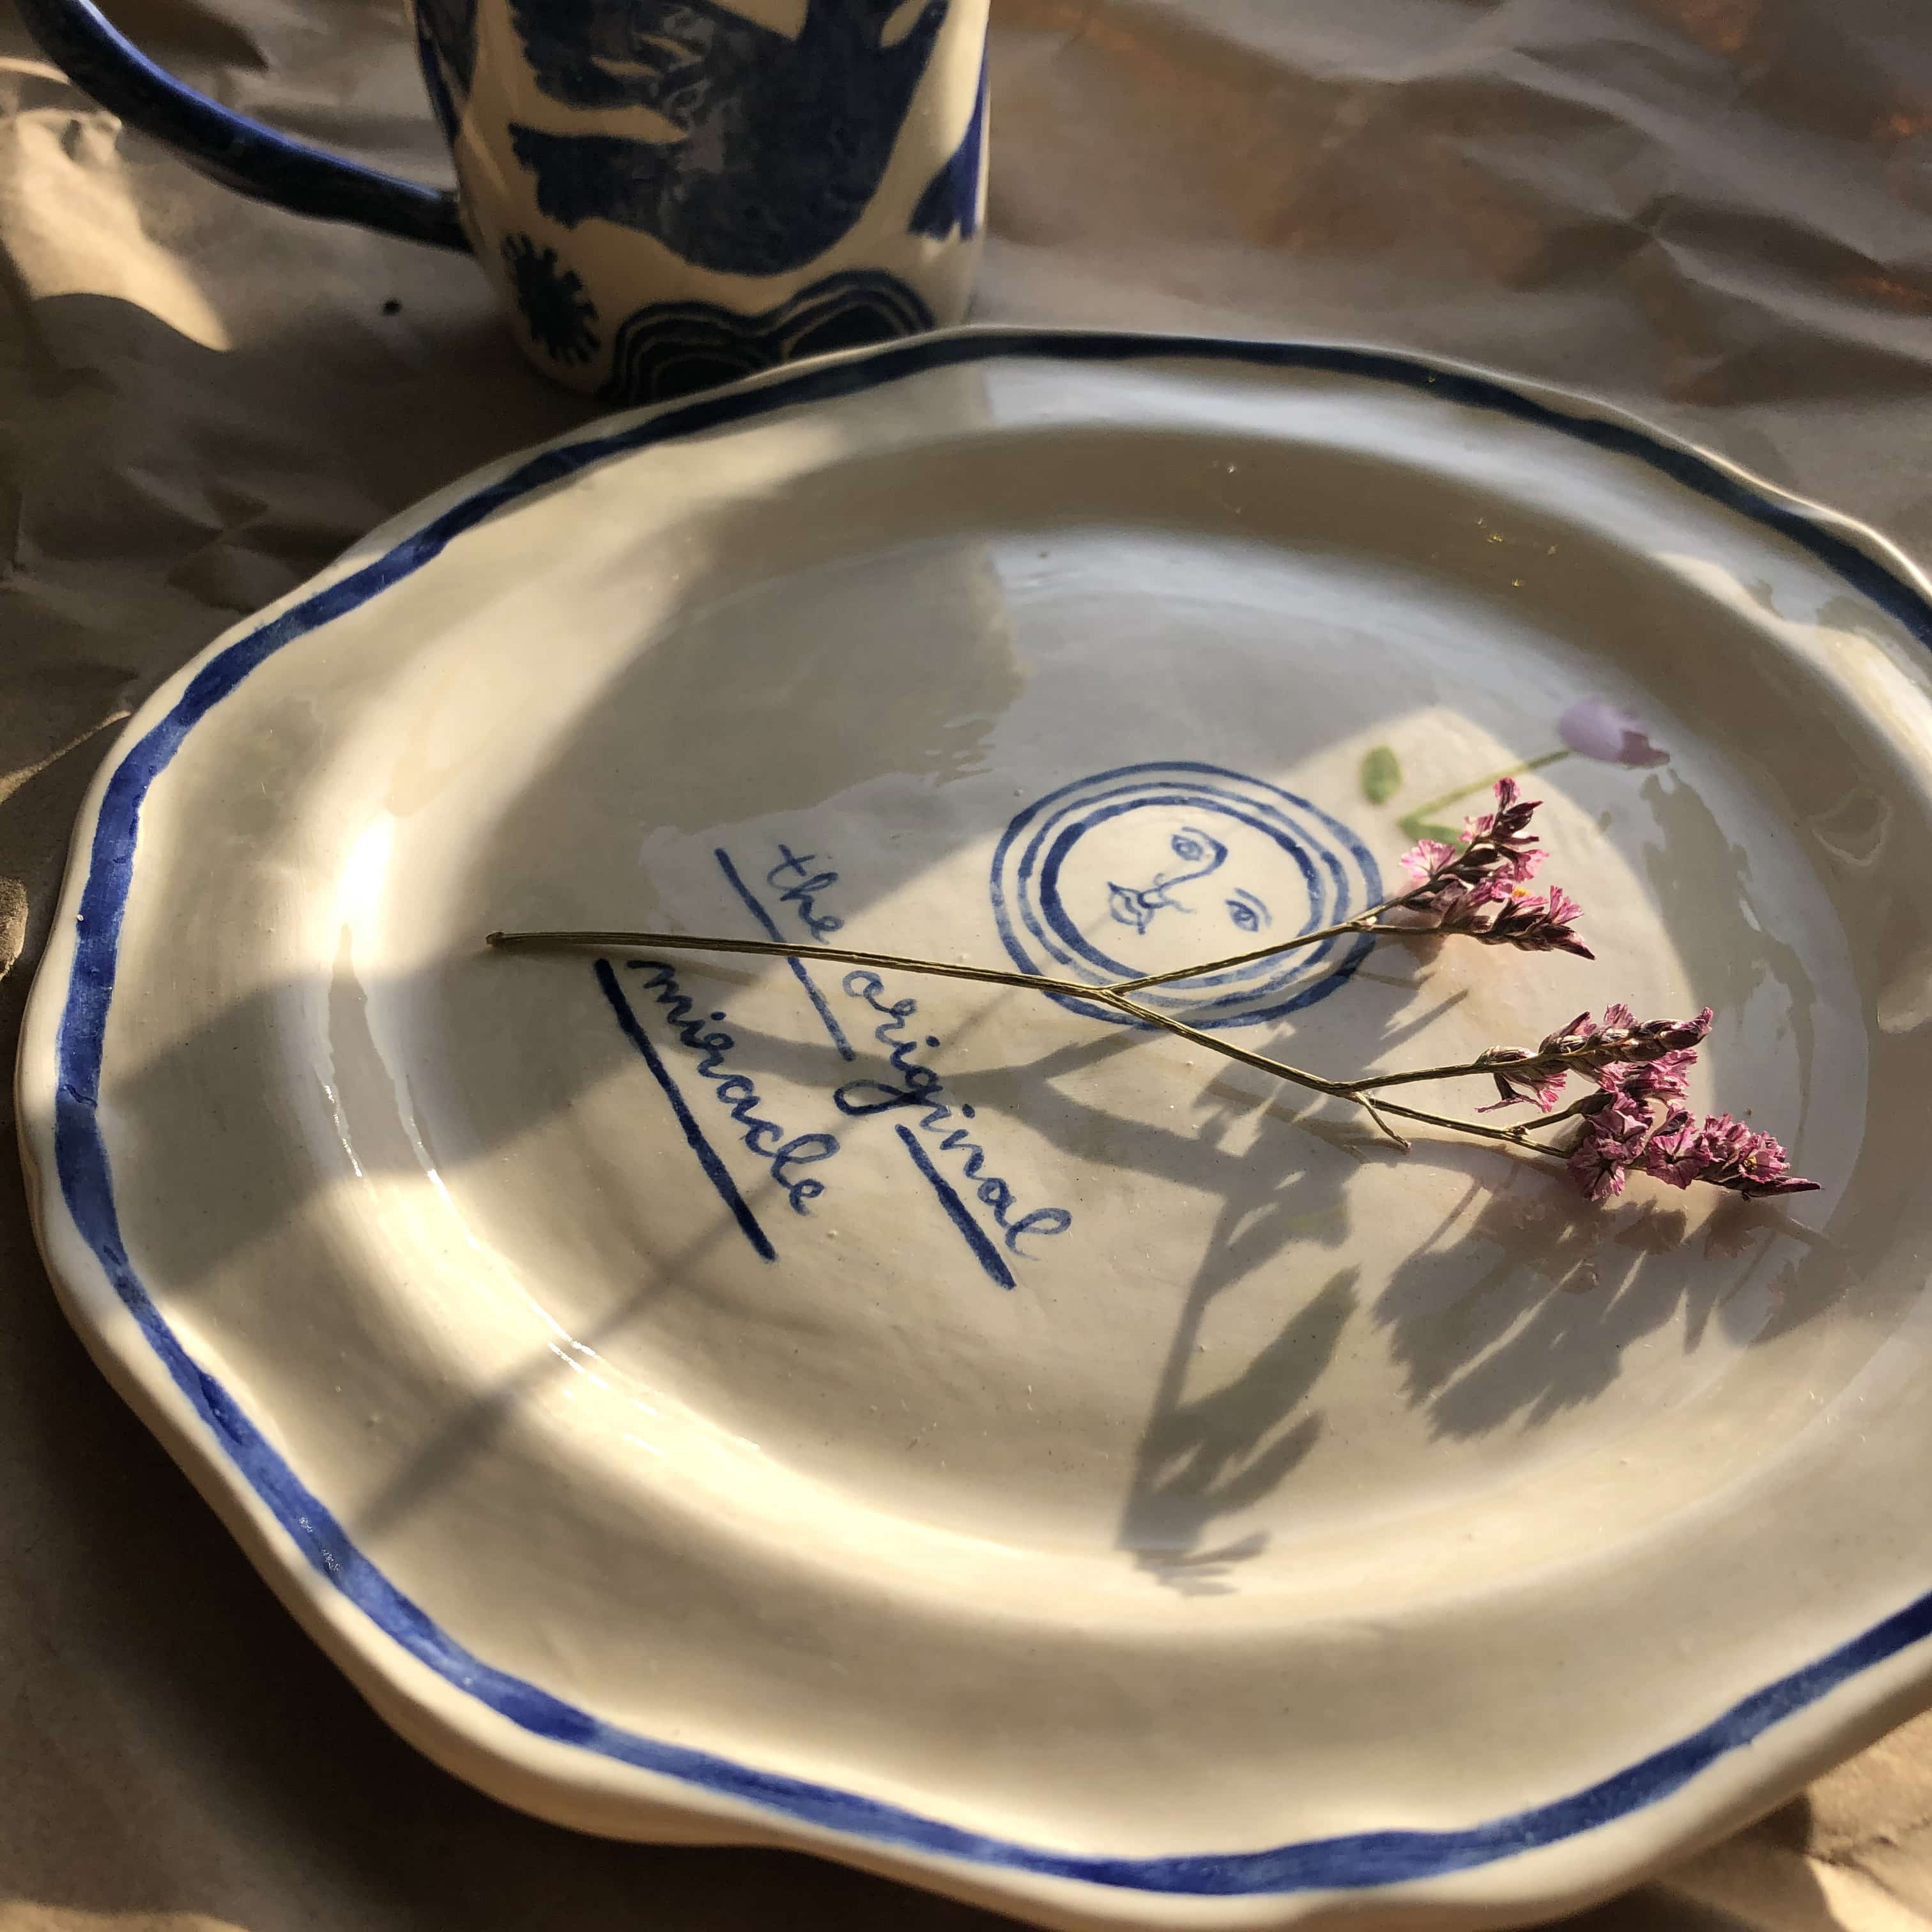 Handmade ceramic plate with a sun motif in the centre with the words 'the original miracle'